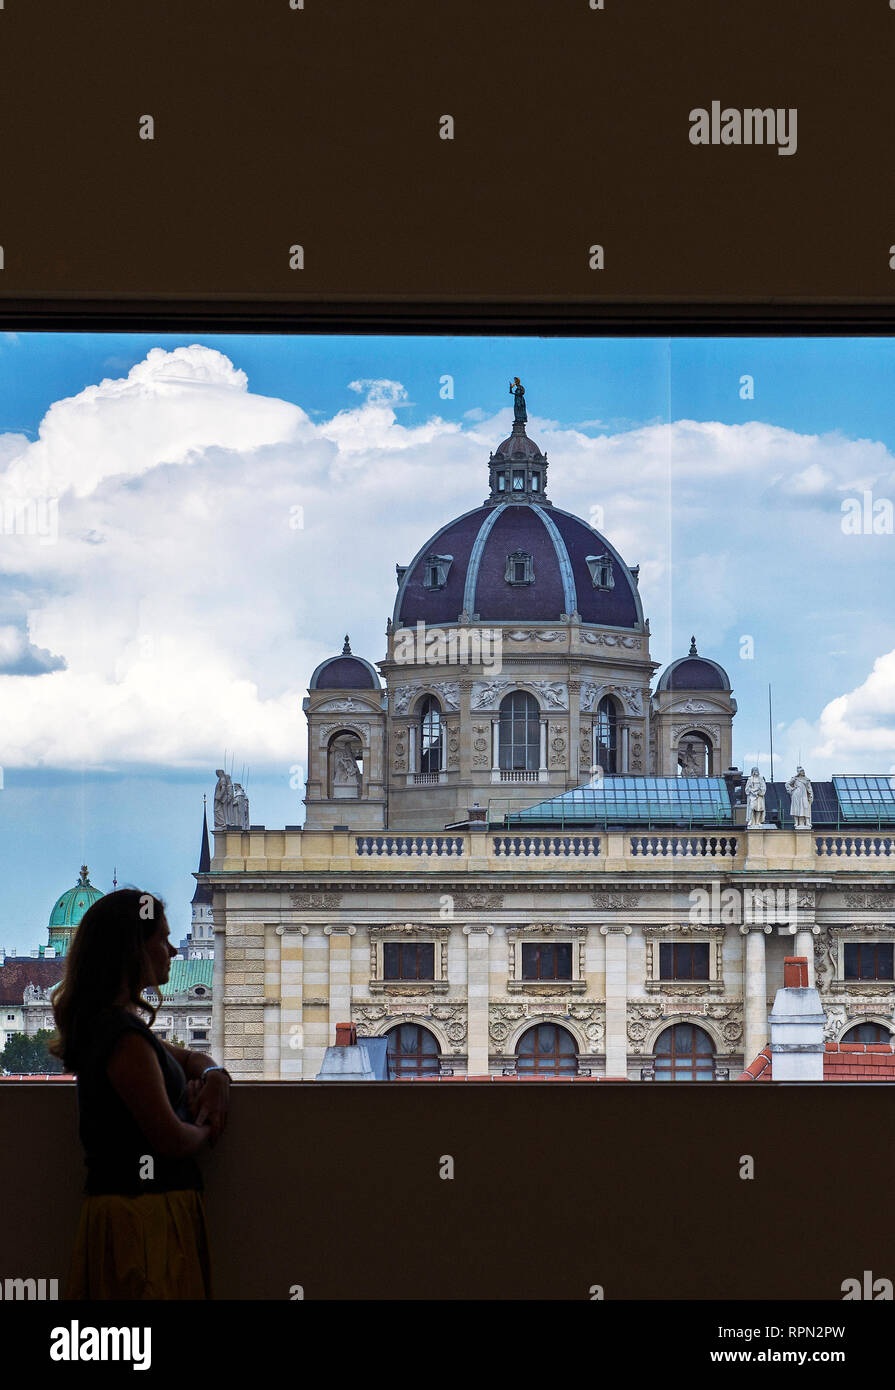 Young woman admiring the view of the Kunsthistorisches museum from a window inside Leopold Museum, Vienna, Austria Stock Photo